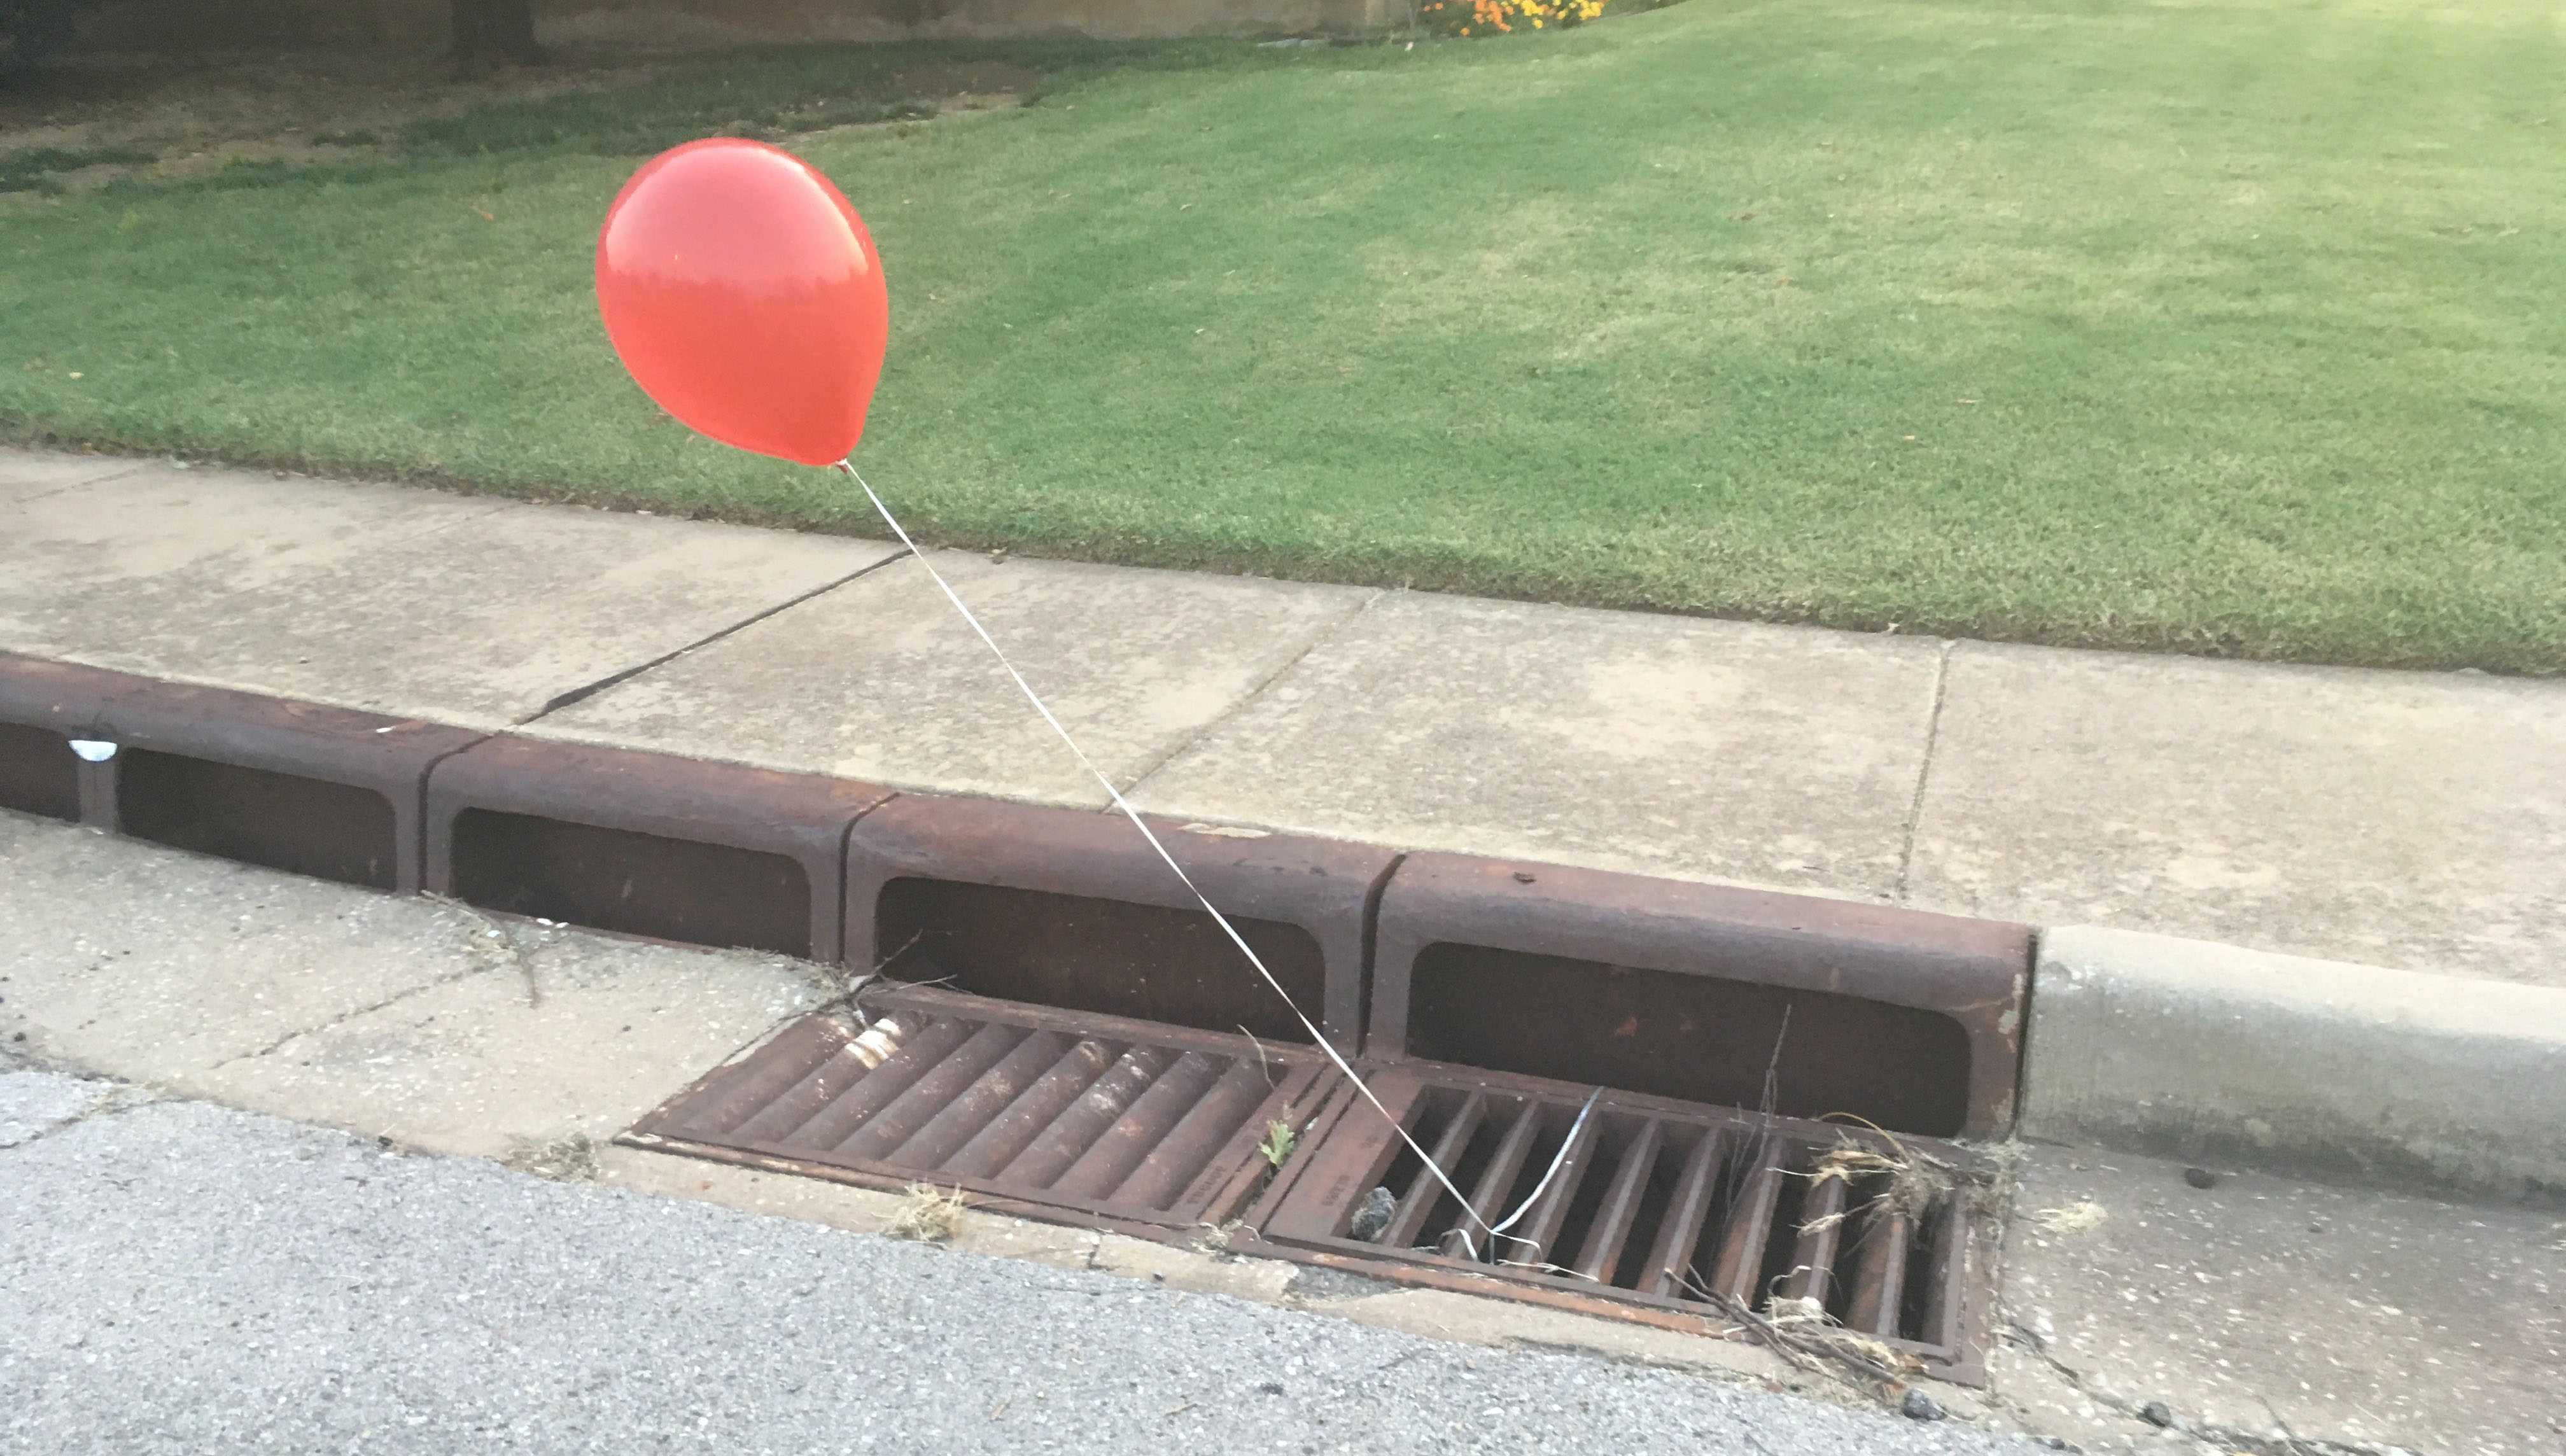 Ingang samenzwering lood Red 'It' balloon spotted on storm drain in Edmond